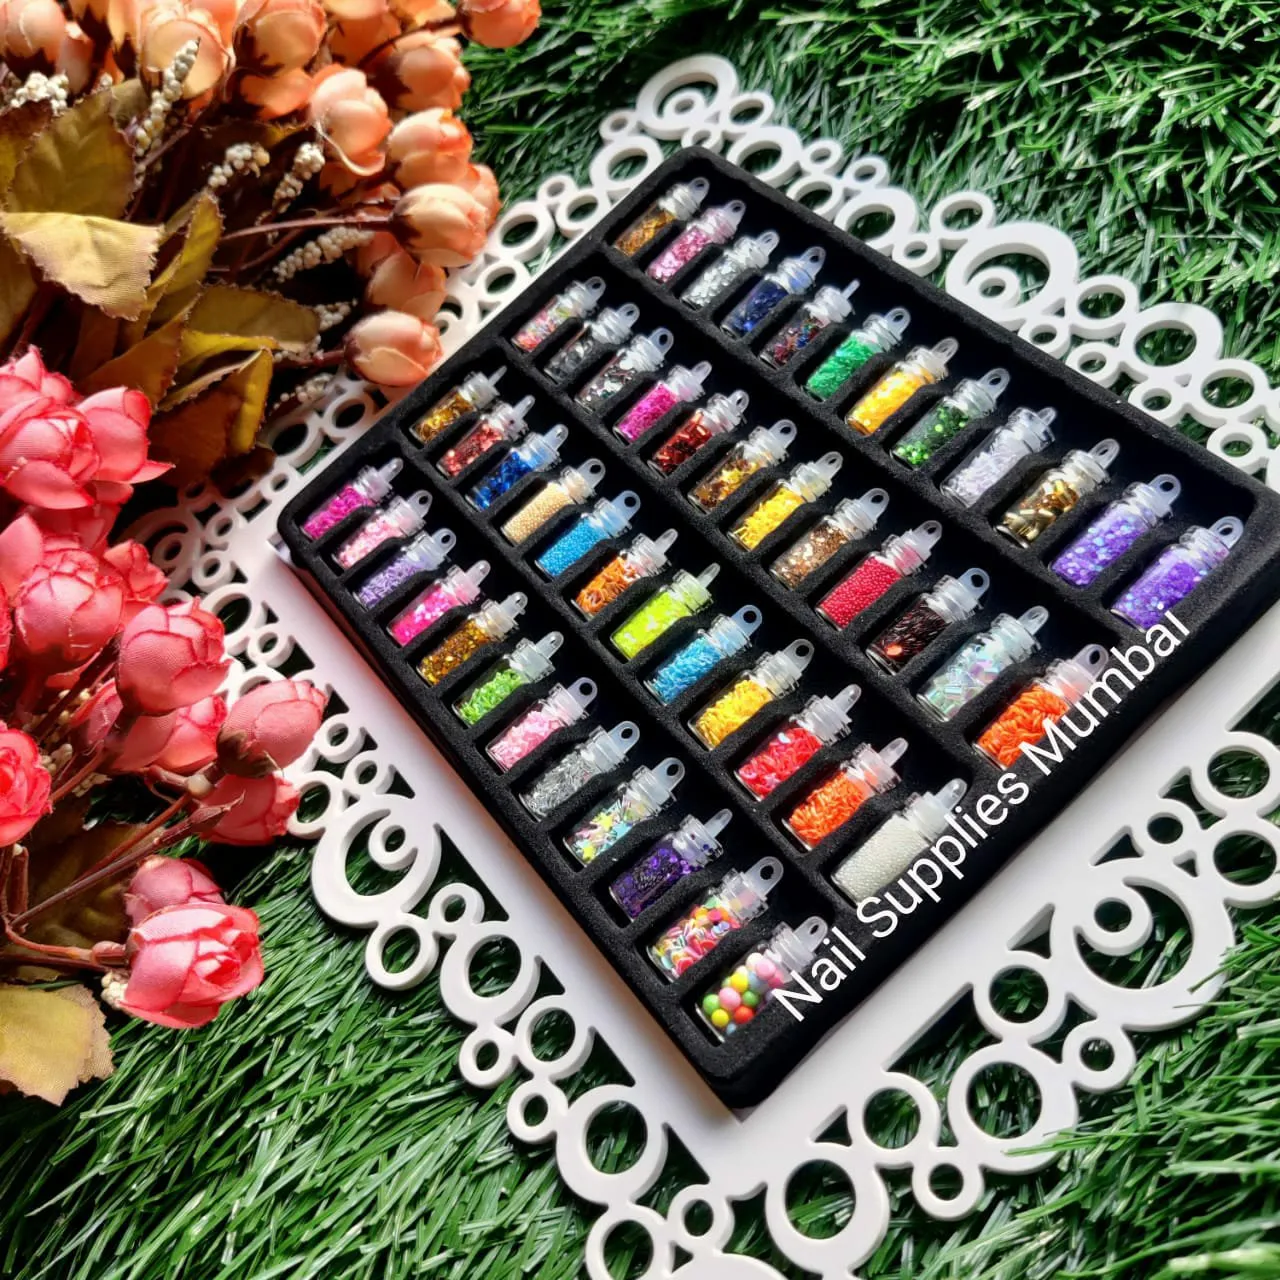 Nail Art Kit with 24 Grids of 576 Pieces Matte Press-on Nails - Includes 4  Different Acrylic Short Medium Long Length Ballerina False Nail tips  Adhesive Tabs Glue Stickers Tools and Rhinestone Accessories - Perfect...